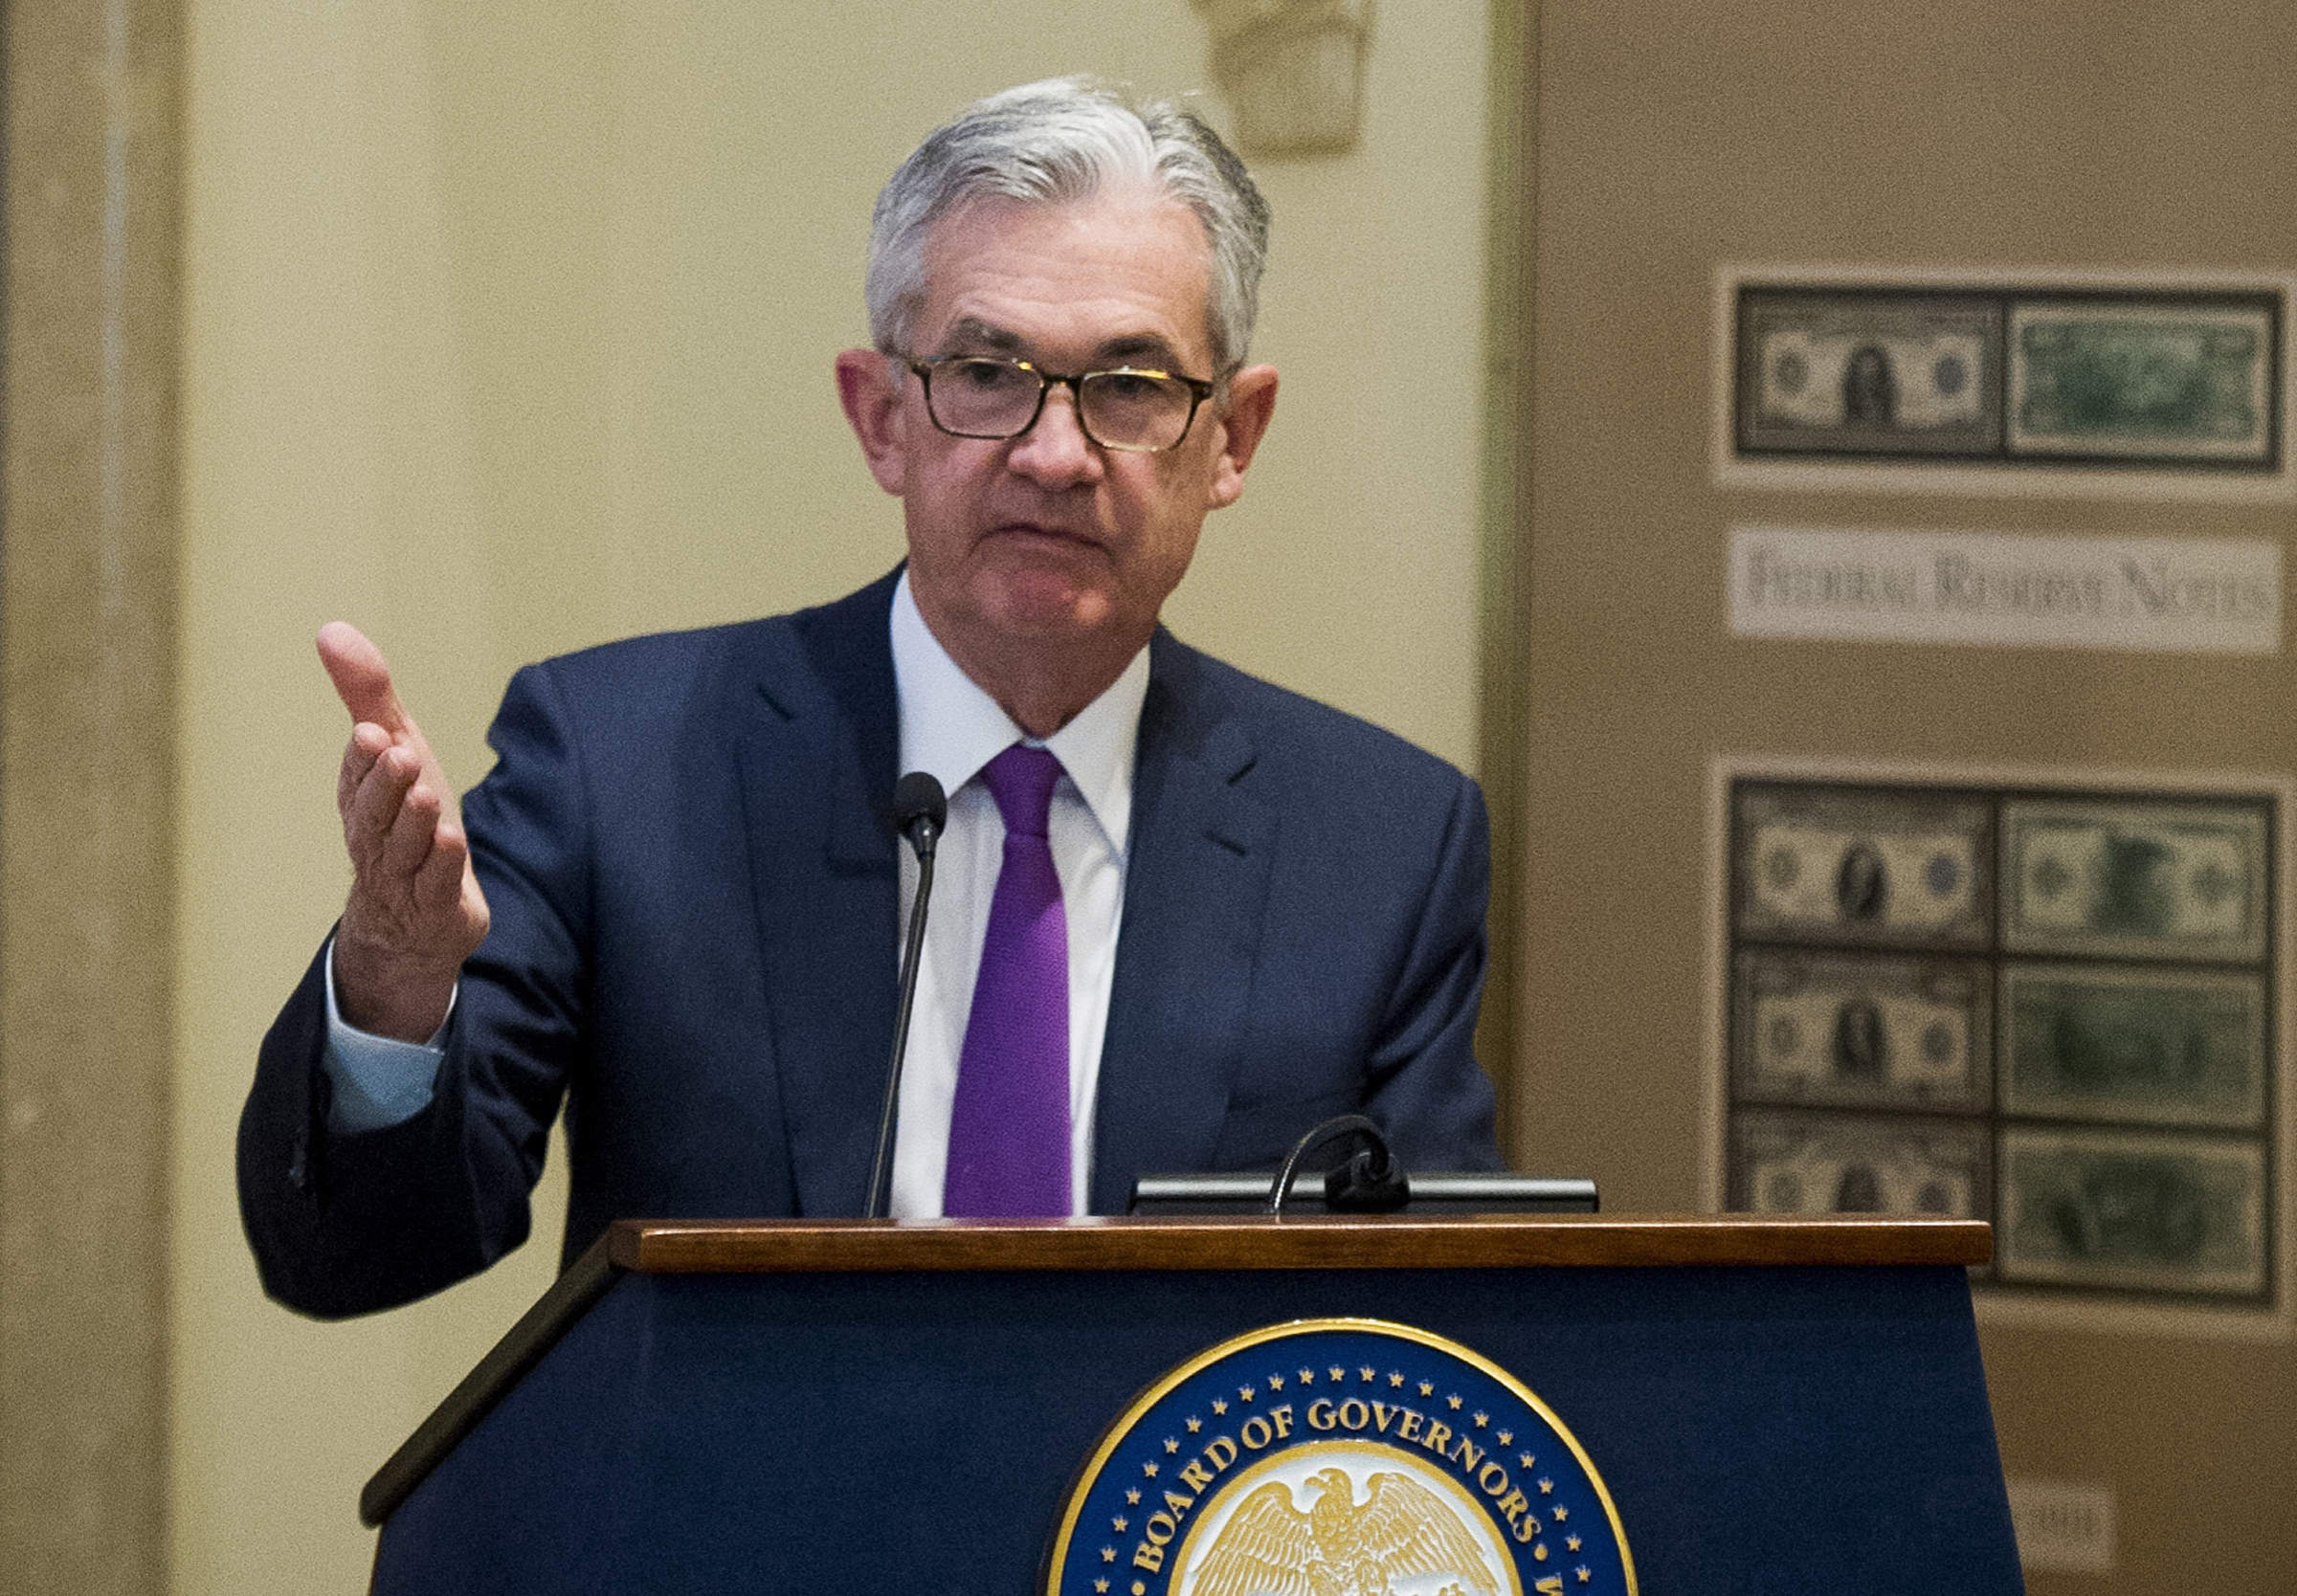 Federal Reserve Chairman Jerome Powell addresses the Federal Reserve Board's 15th annual College Fed Challenge Finals in Washington on Nov. 29.